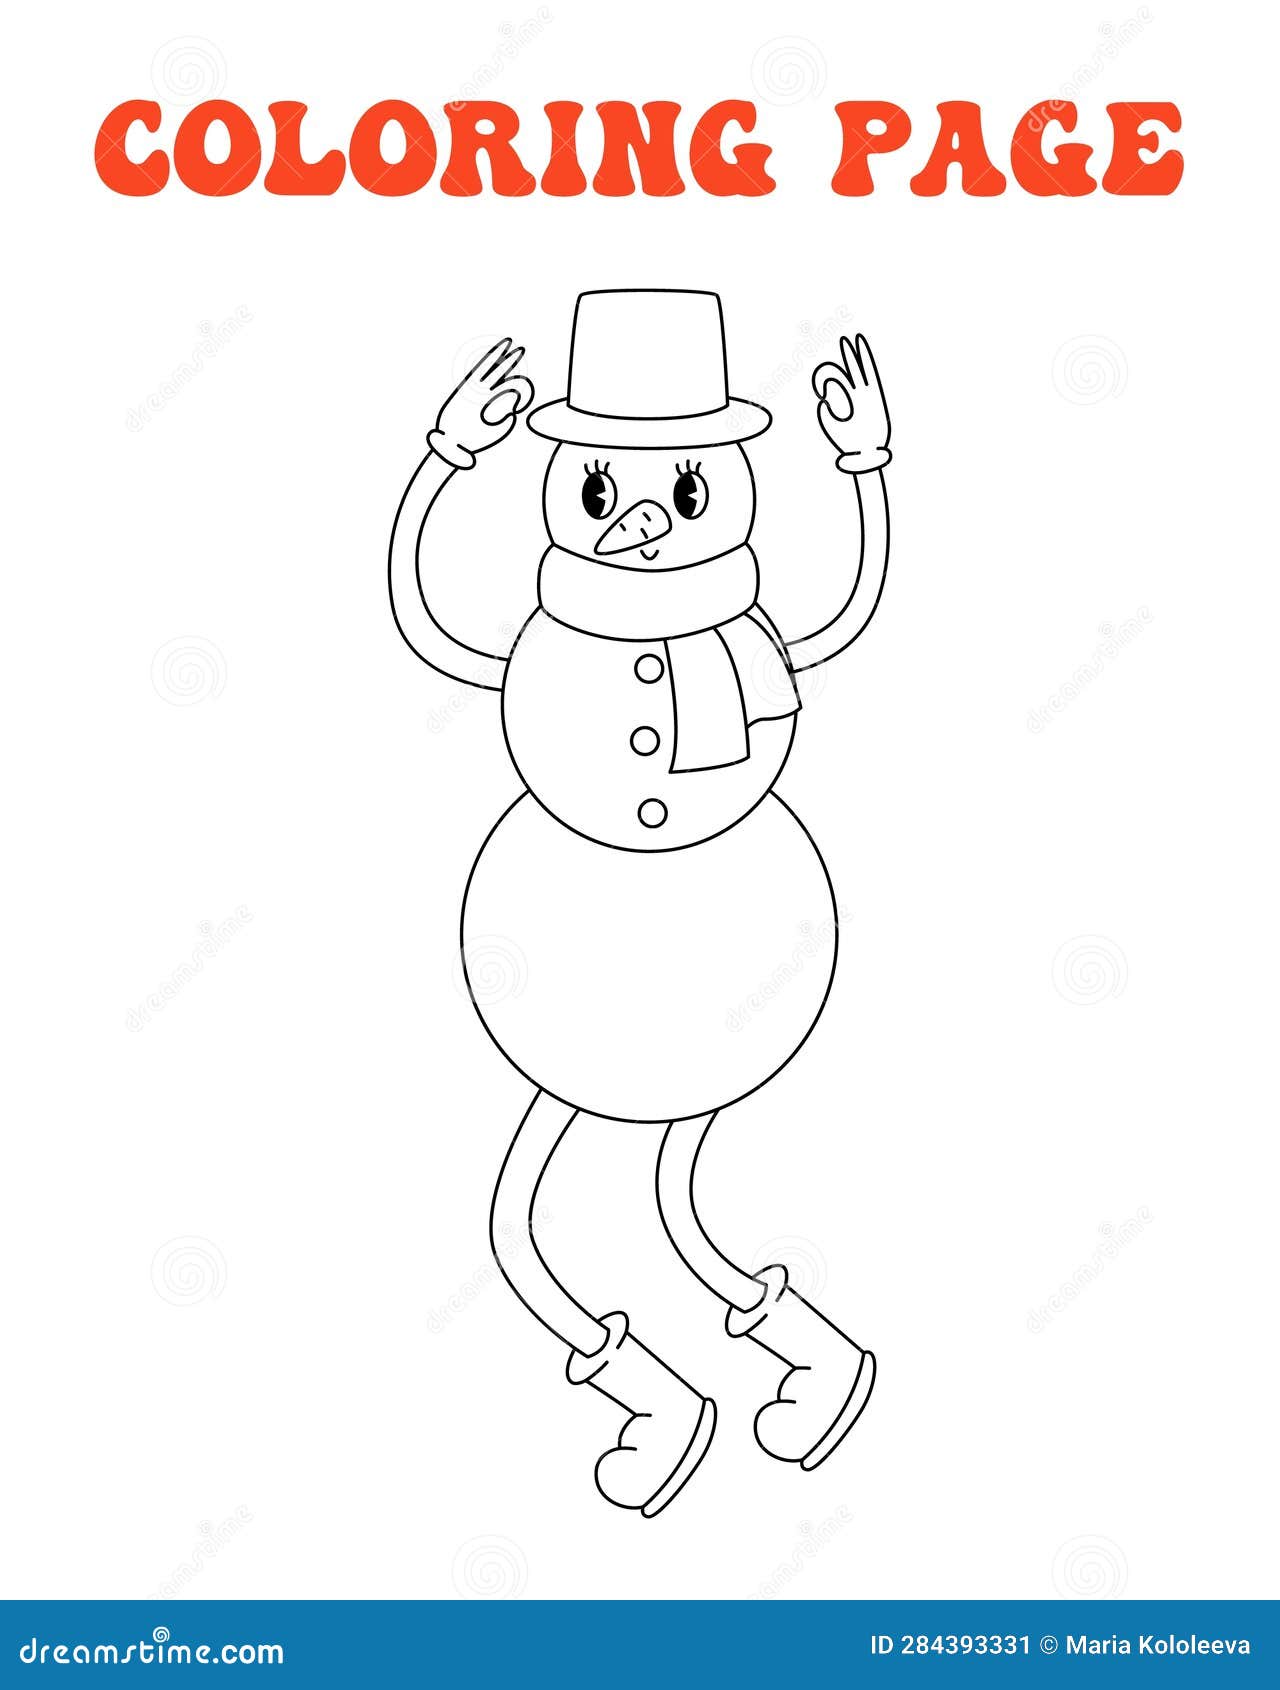 S s groovy coloring page retro print with line cute snowman printable worksheet with solution for school and stock vector